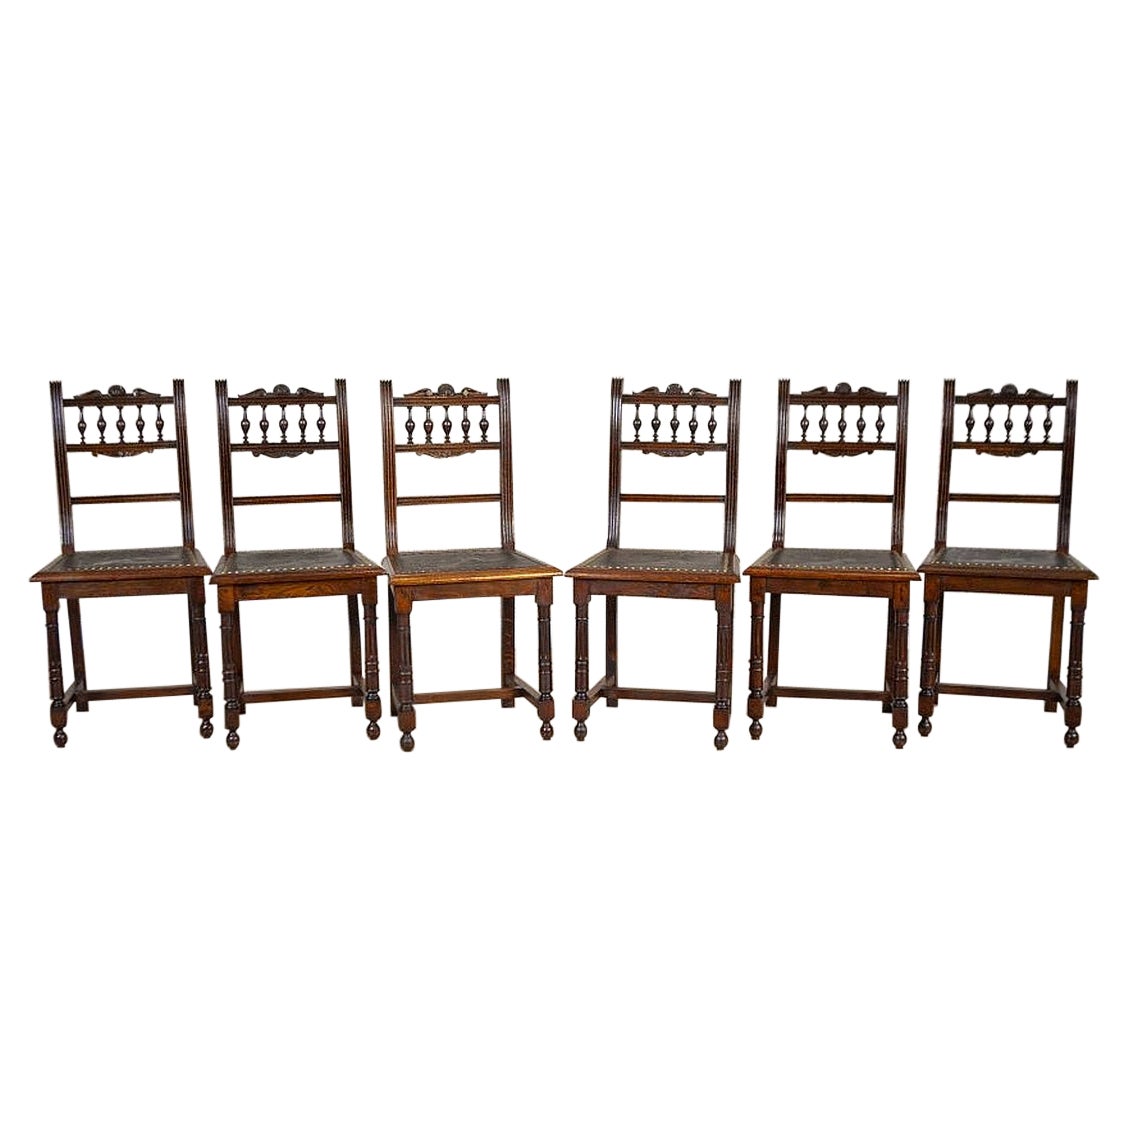 Set of Decorative Oak Chairs From the, Early 20th Century For Sale